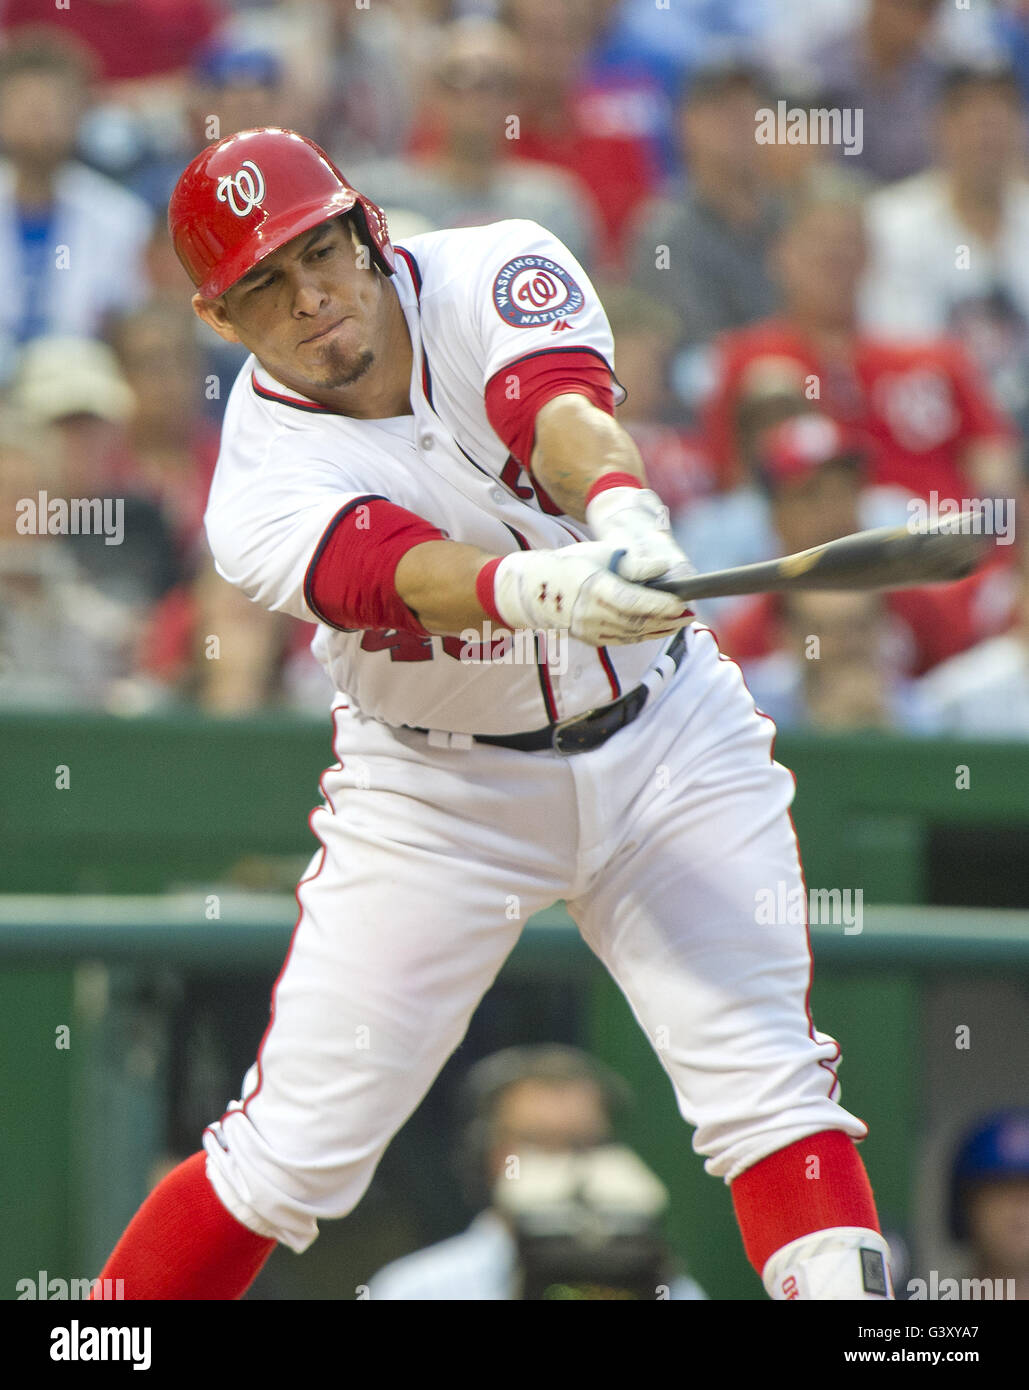 Washington, District of Columbia, USA. 15th June, 2016. Washington Nationals catcher Wilson Ramos (40) bats in the eleventh inning against the Chicago Cubs at Nationals Park in Washington, DC on Wednesday, June 15, 2016. The Nationals won the game 5 - 4 in 12 innings.Credit: Ron Sachs/CNP Credit:  Ron Sachs/CNP/ZUMA Wire/Alamy Live News Stock Photo